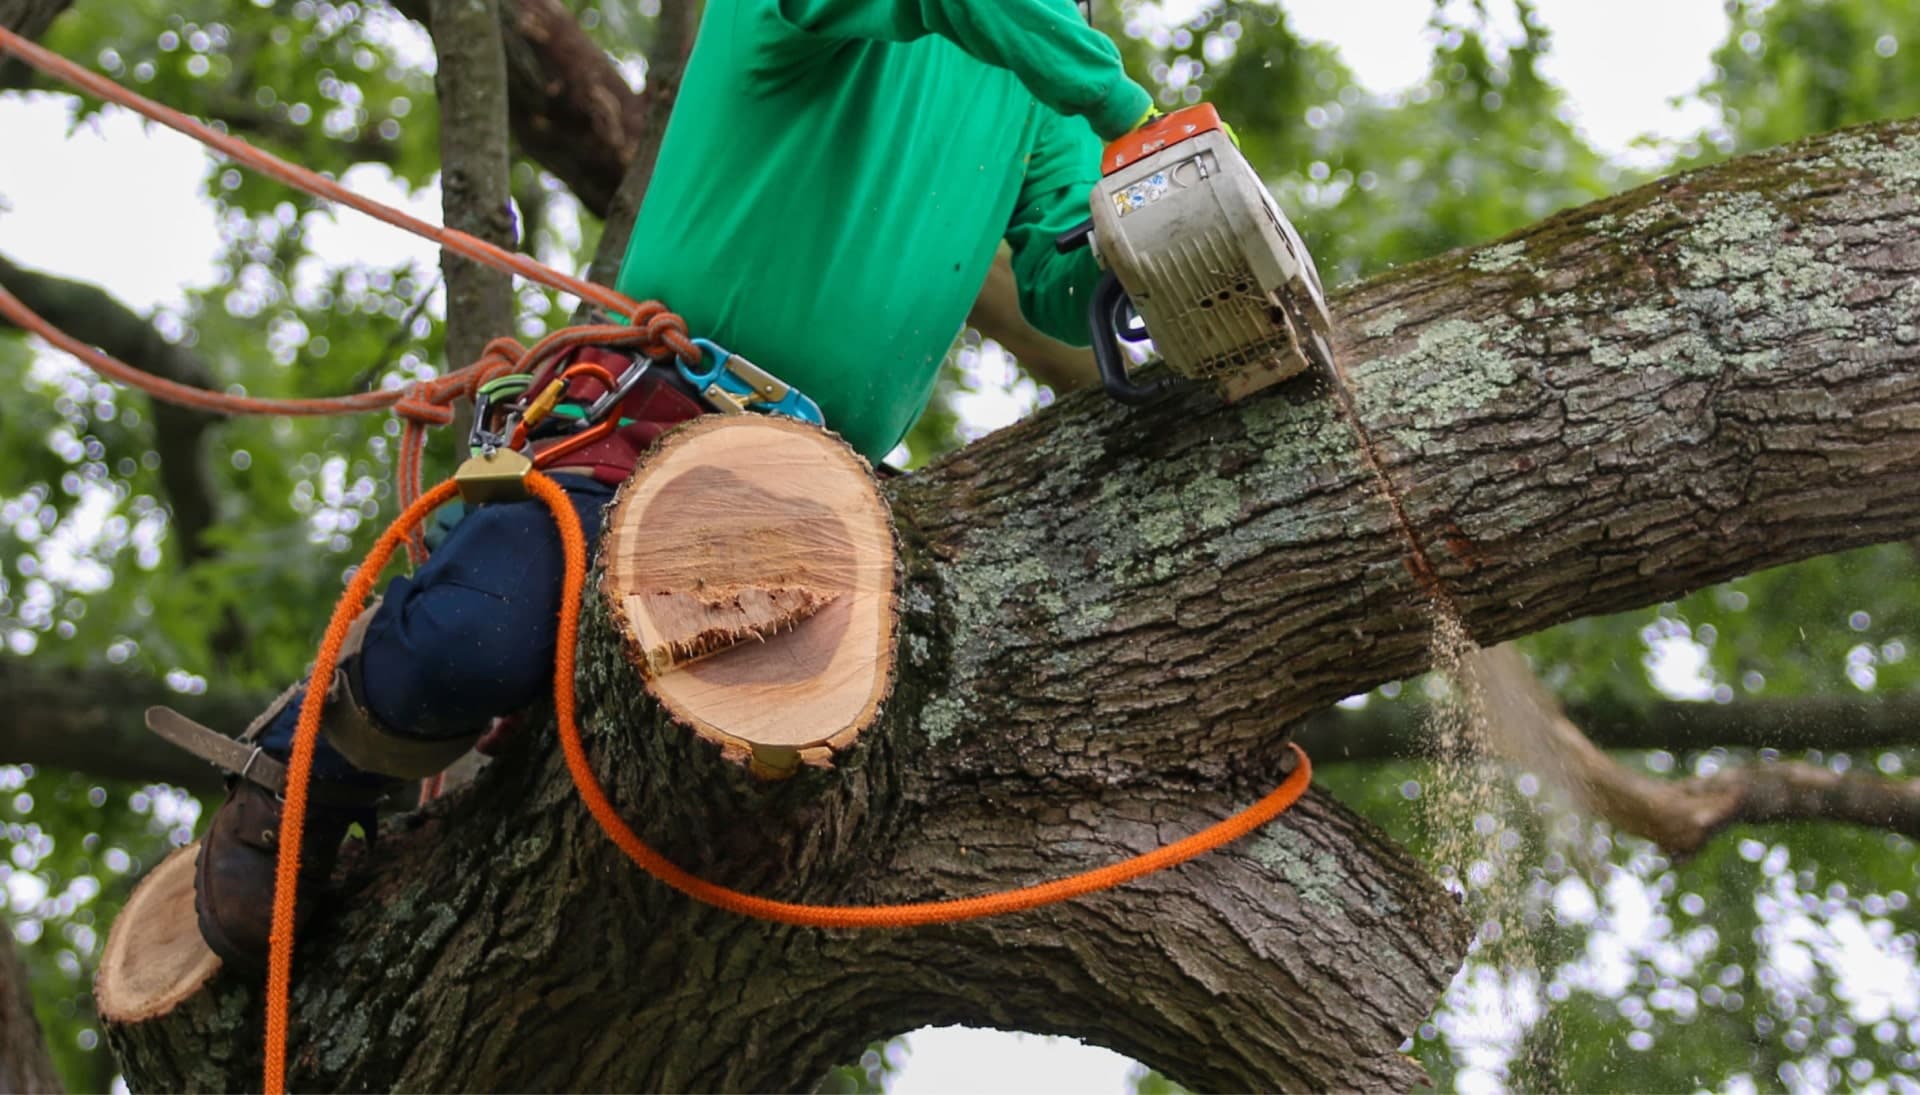 Shed your worries away with best tree removal in Louisville